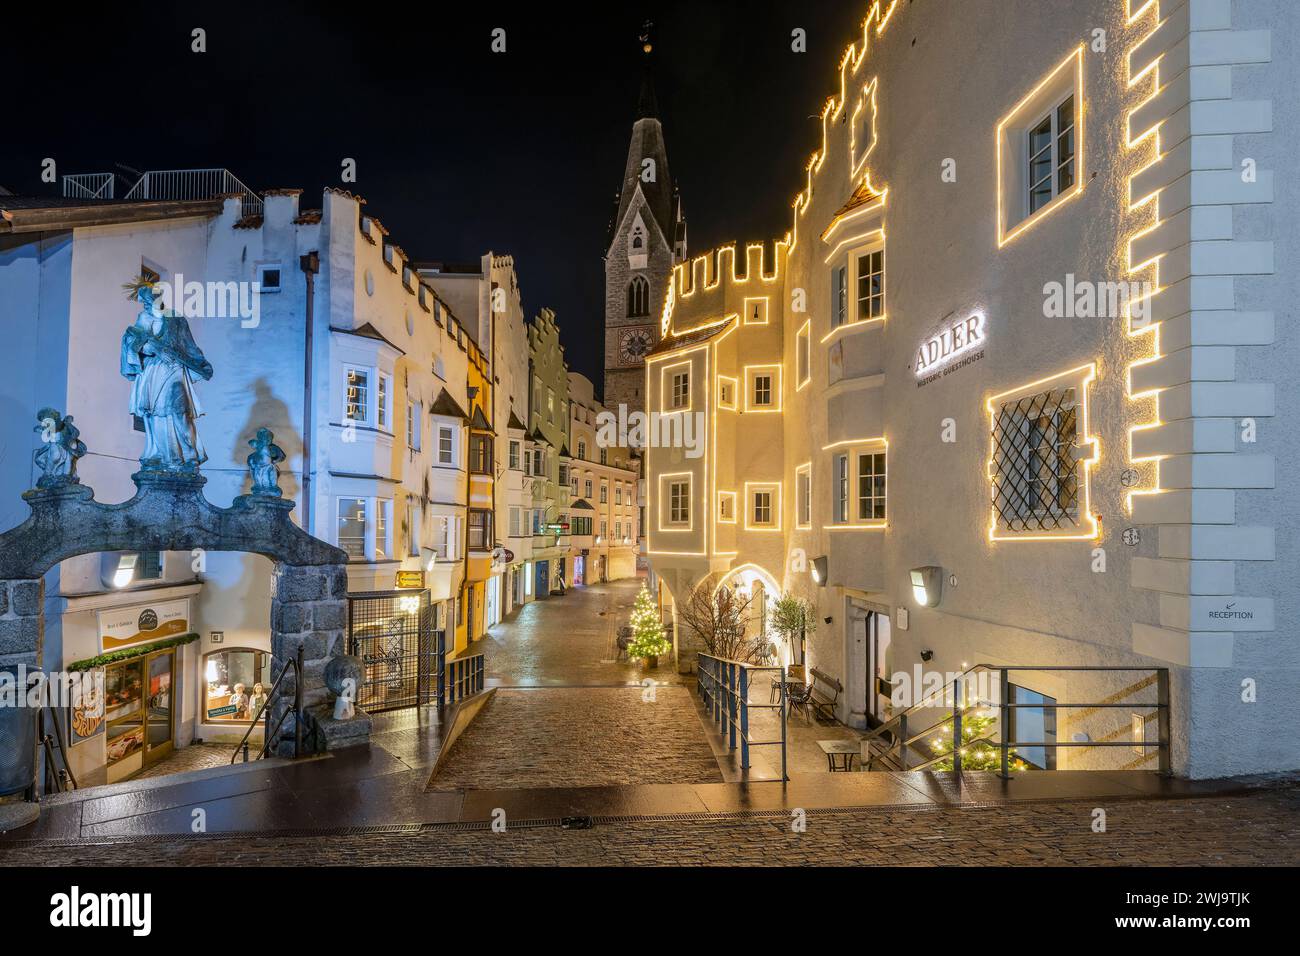 Street adorned with festive Christmas lights, Brixen-Bressanone, South Tyrol, Italy Stock Photo